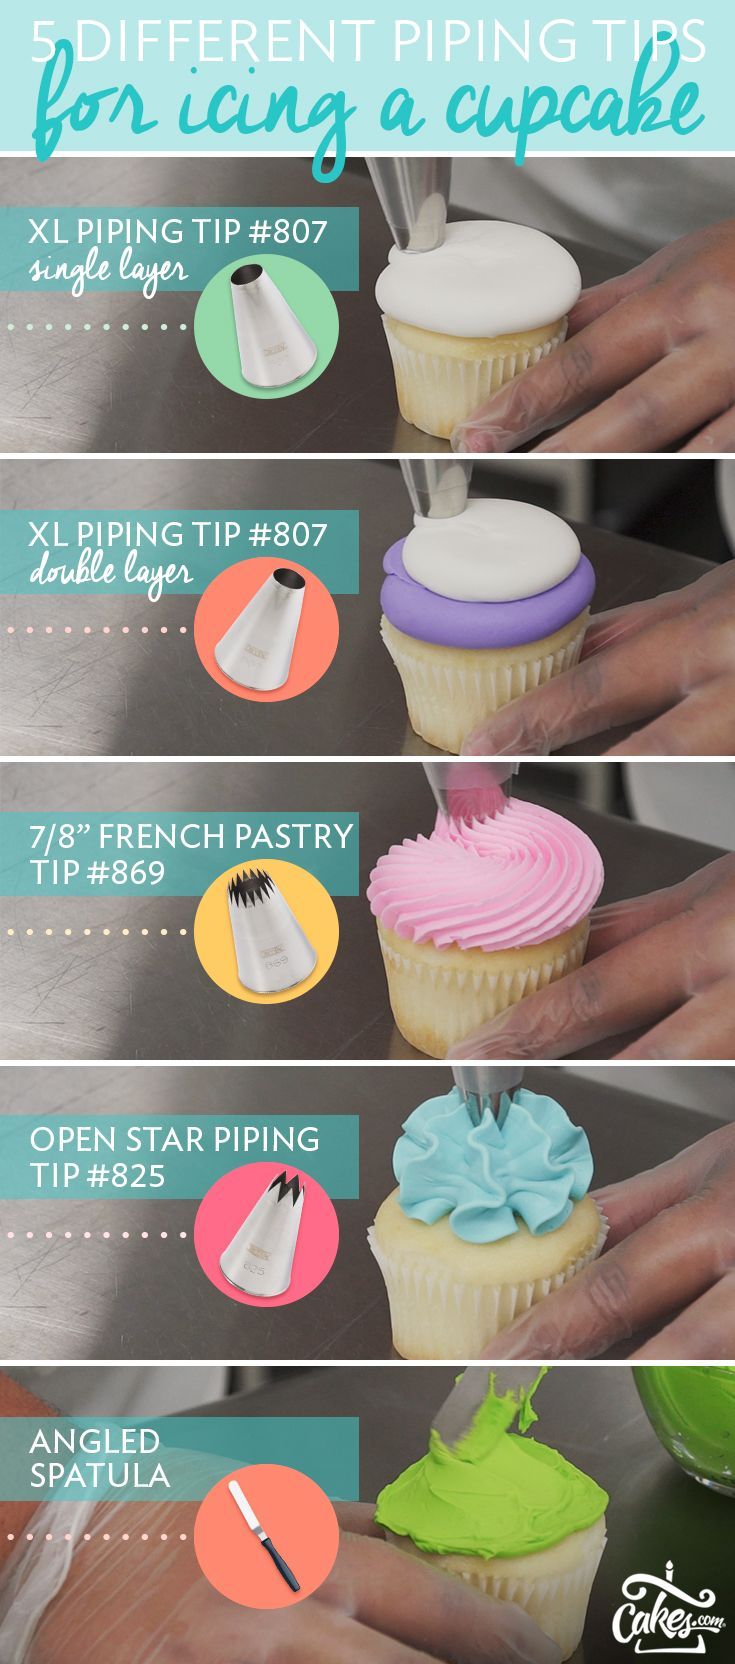 5 different tips for icing cupcakes.